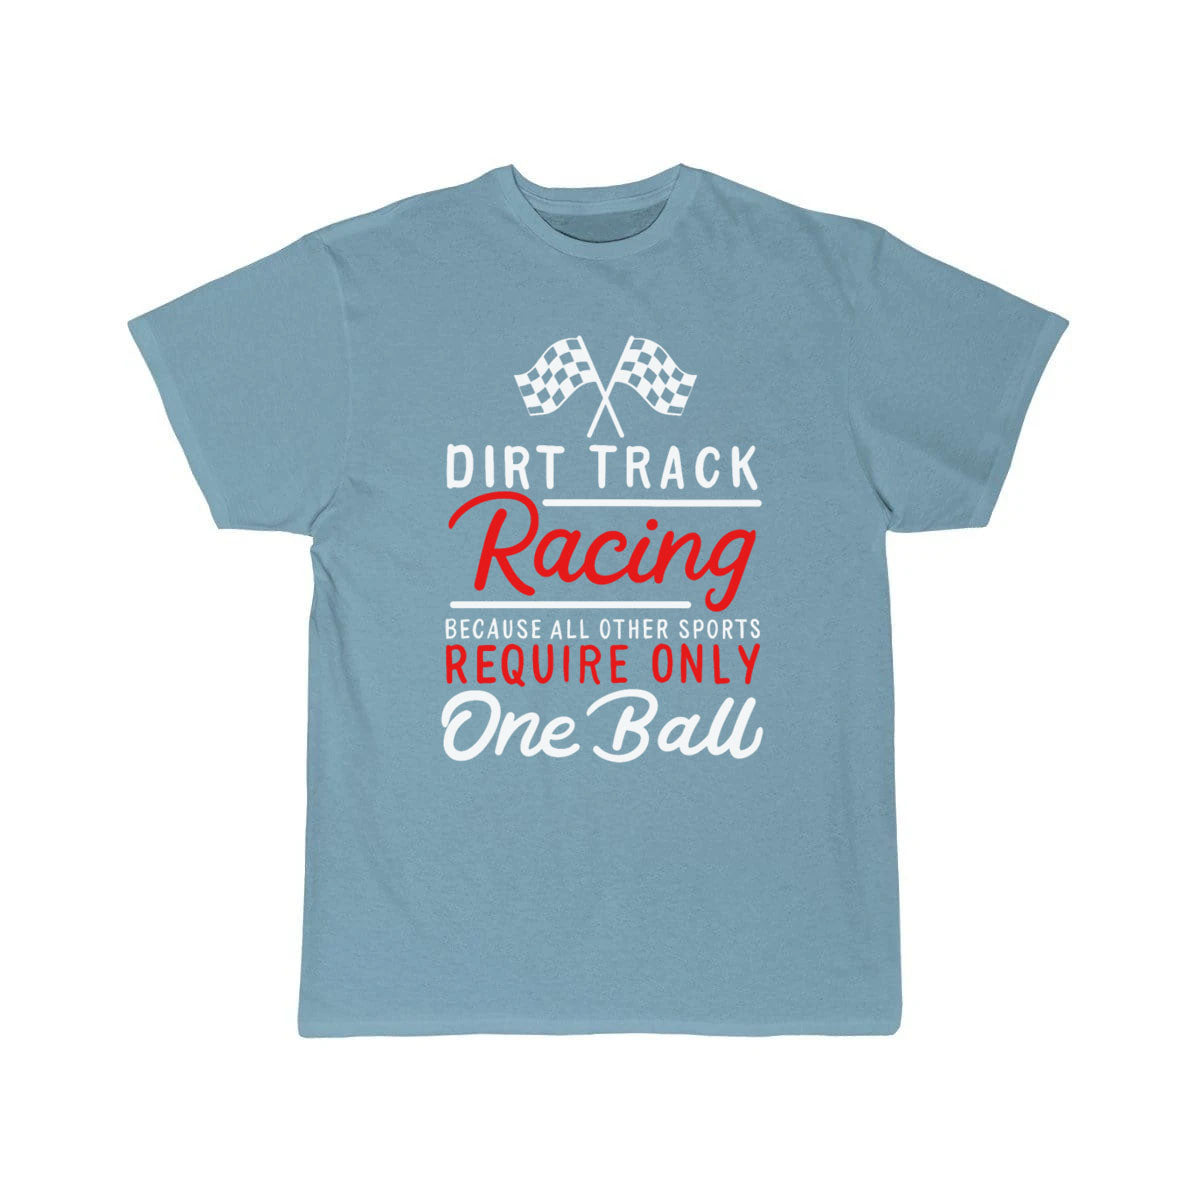 Dirt Track Racing Because All Other Sports Only T-SHIRT THE AV8R